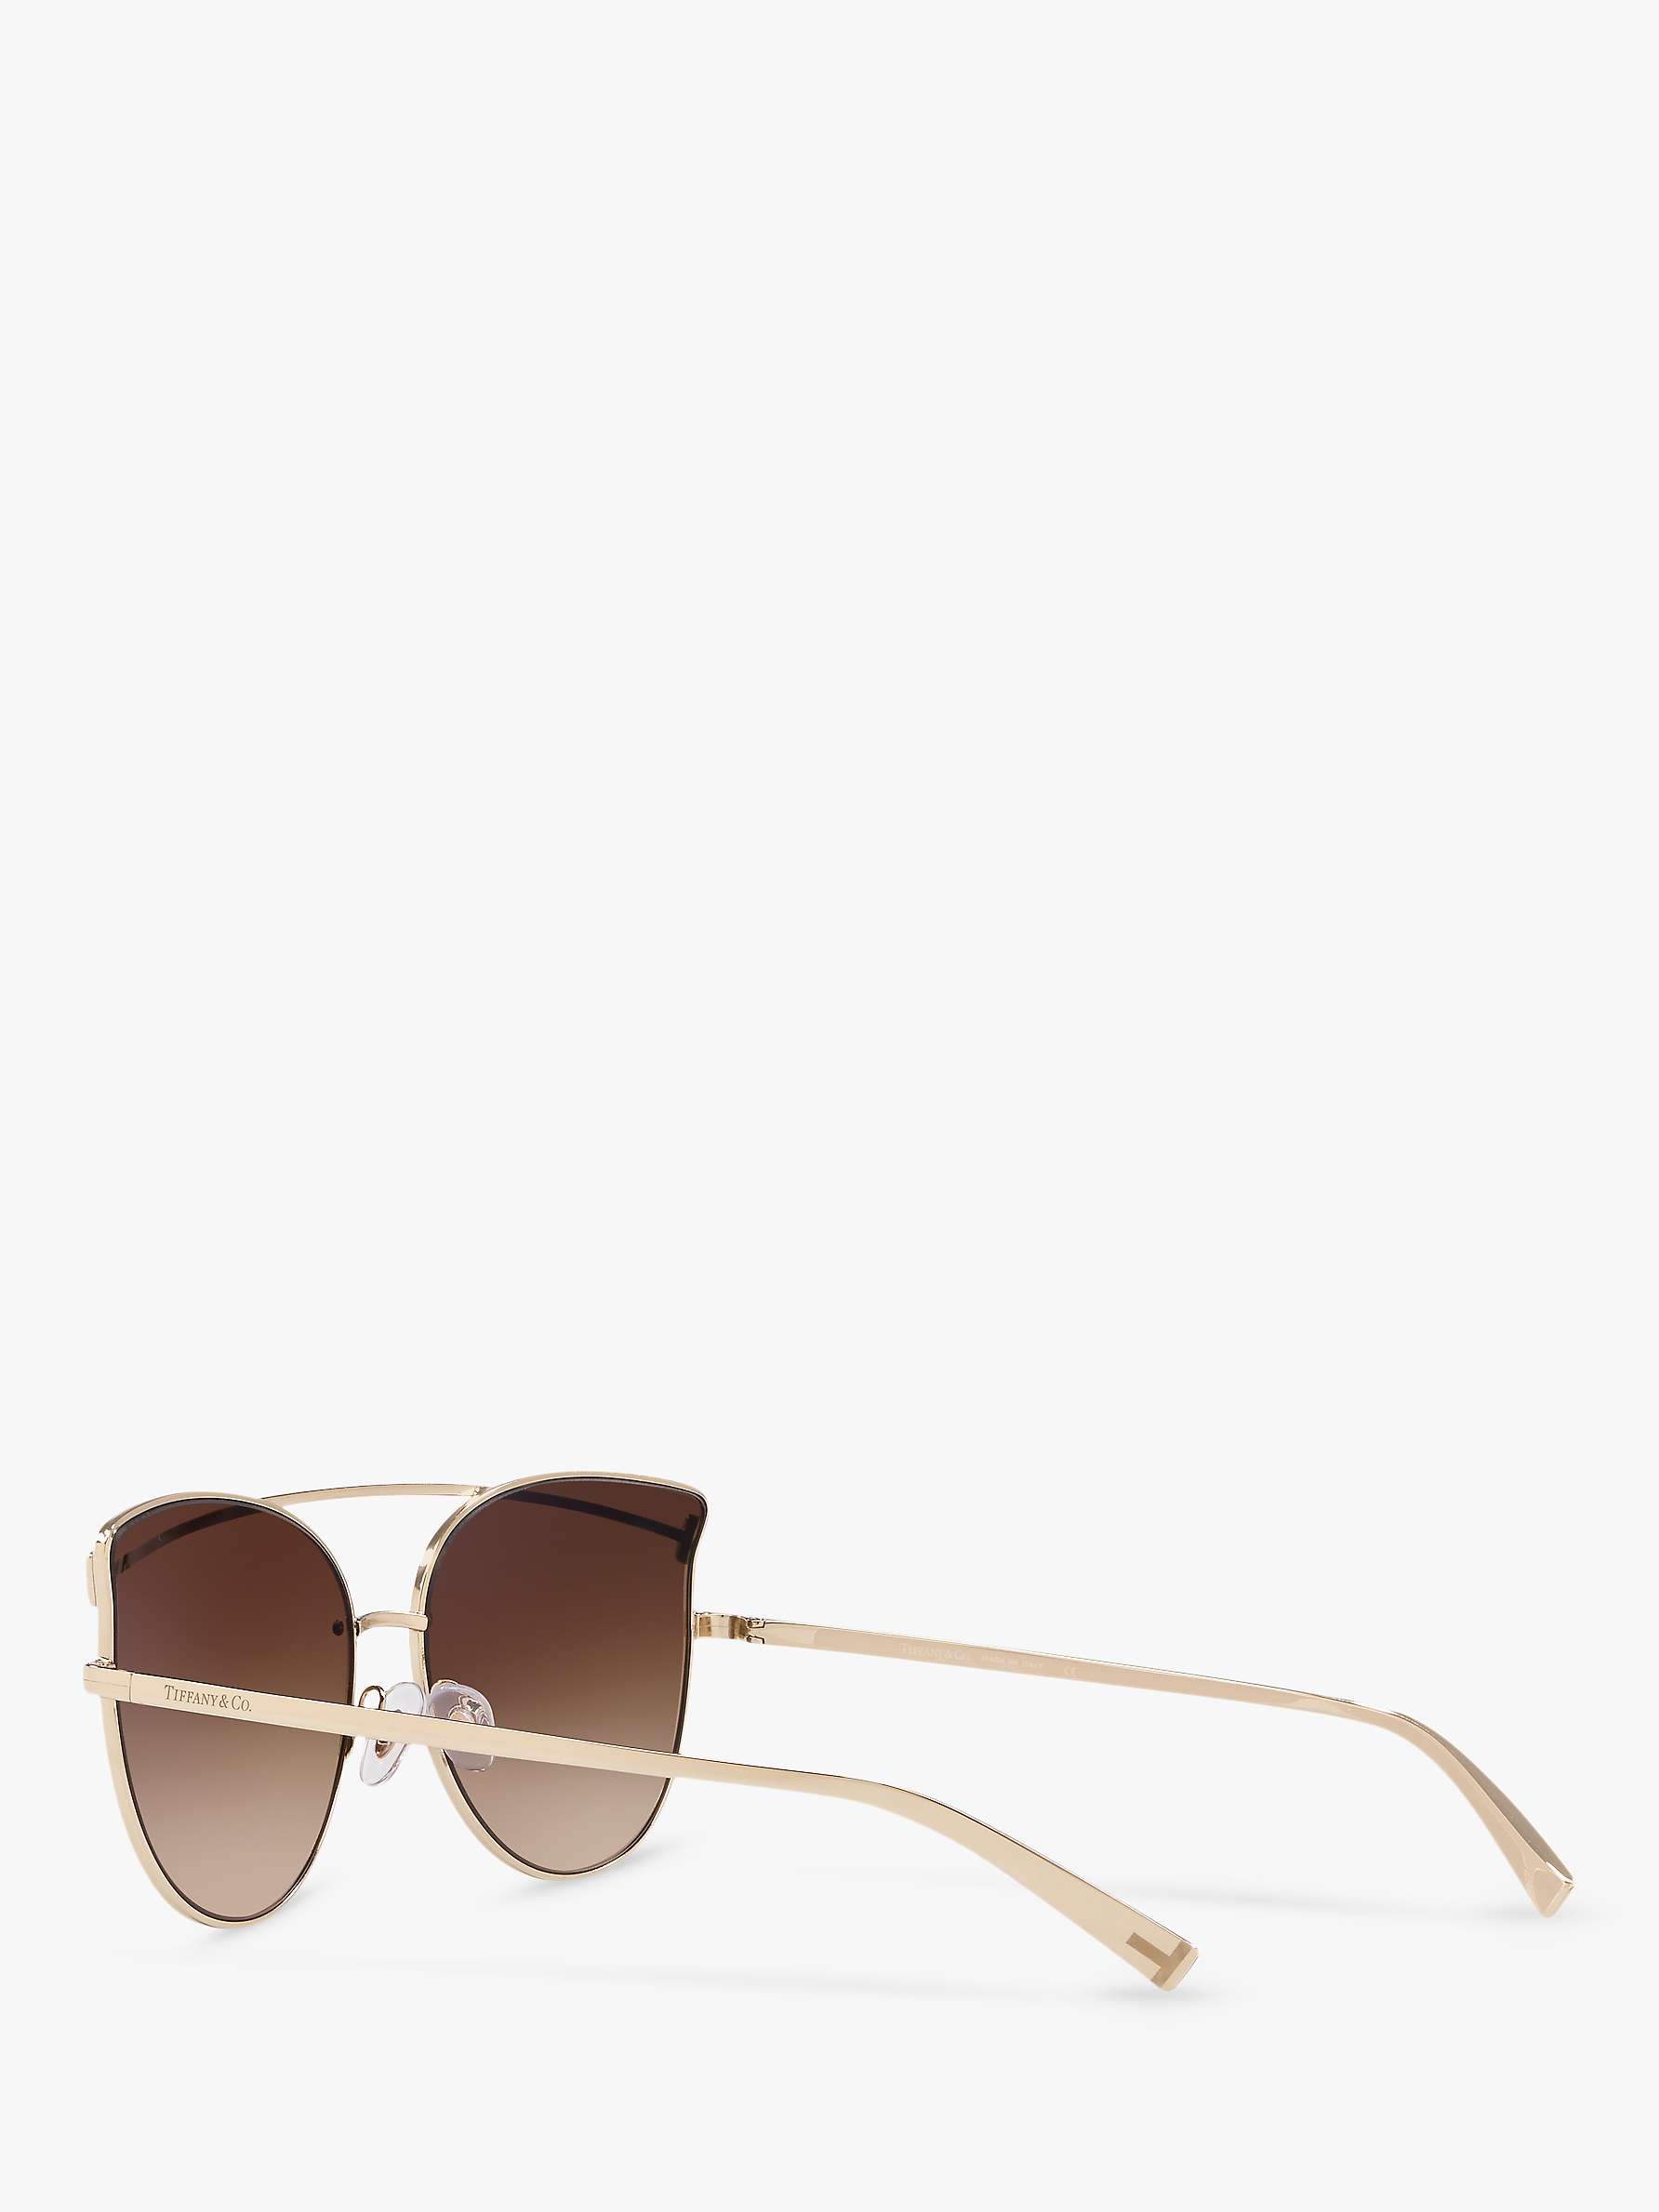 Buy Tiffany & Co TF3064 Women's Cat's Eye Sunglasses, Pale Gold/Brown Gradient Online at johnlewis.com